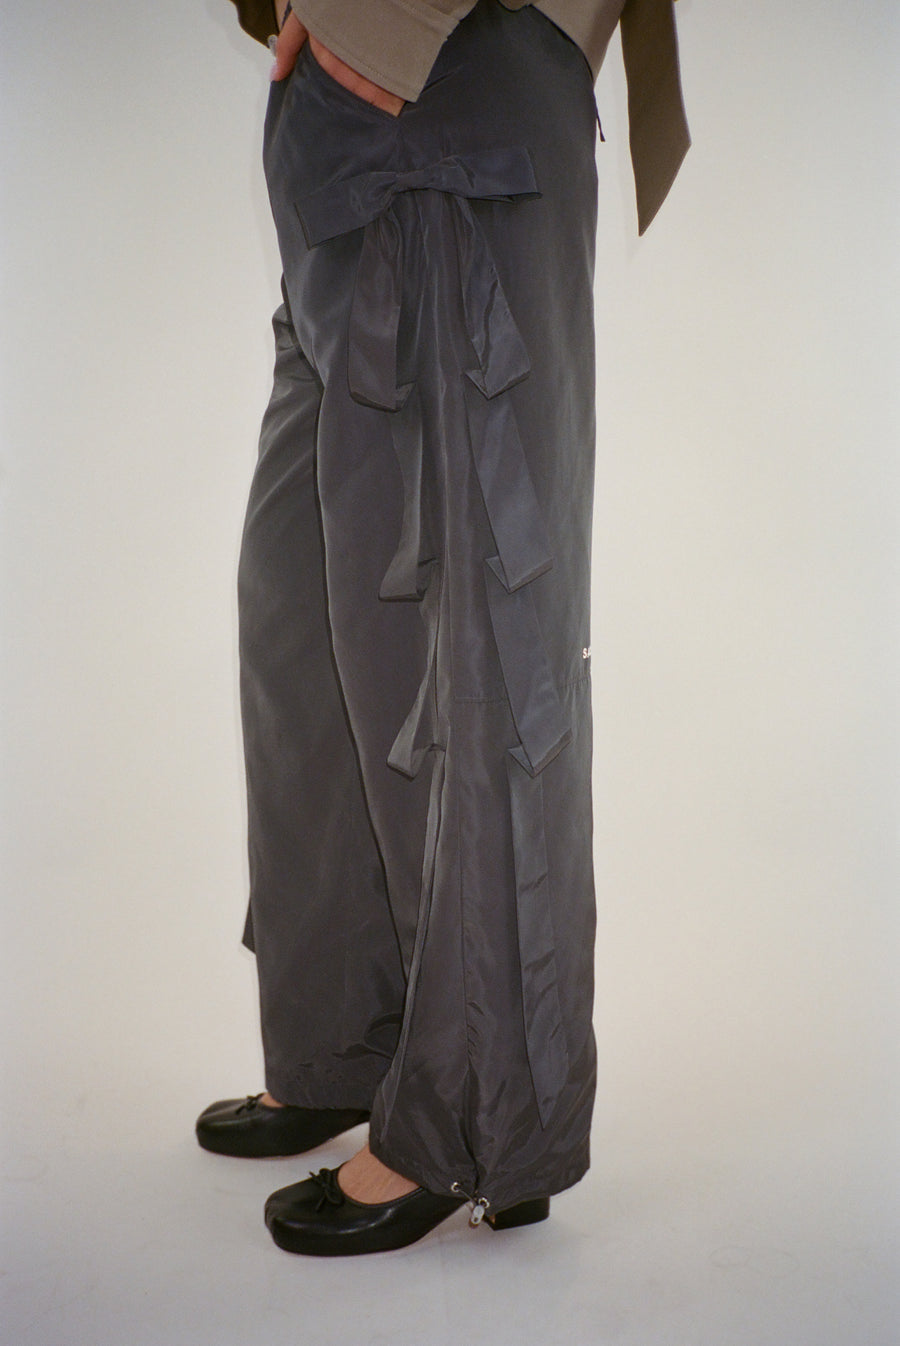 Trackpant in charcoal with tacked bow detail at sides on model